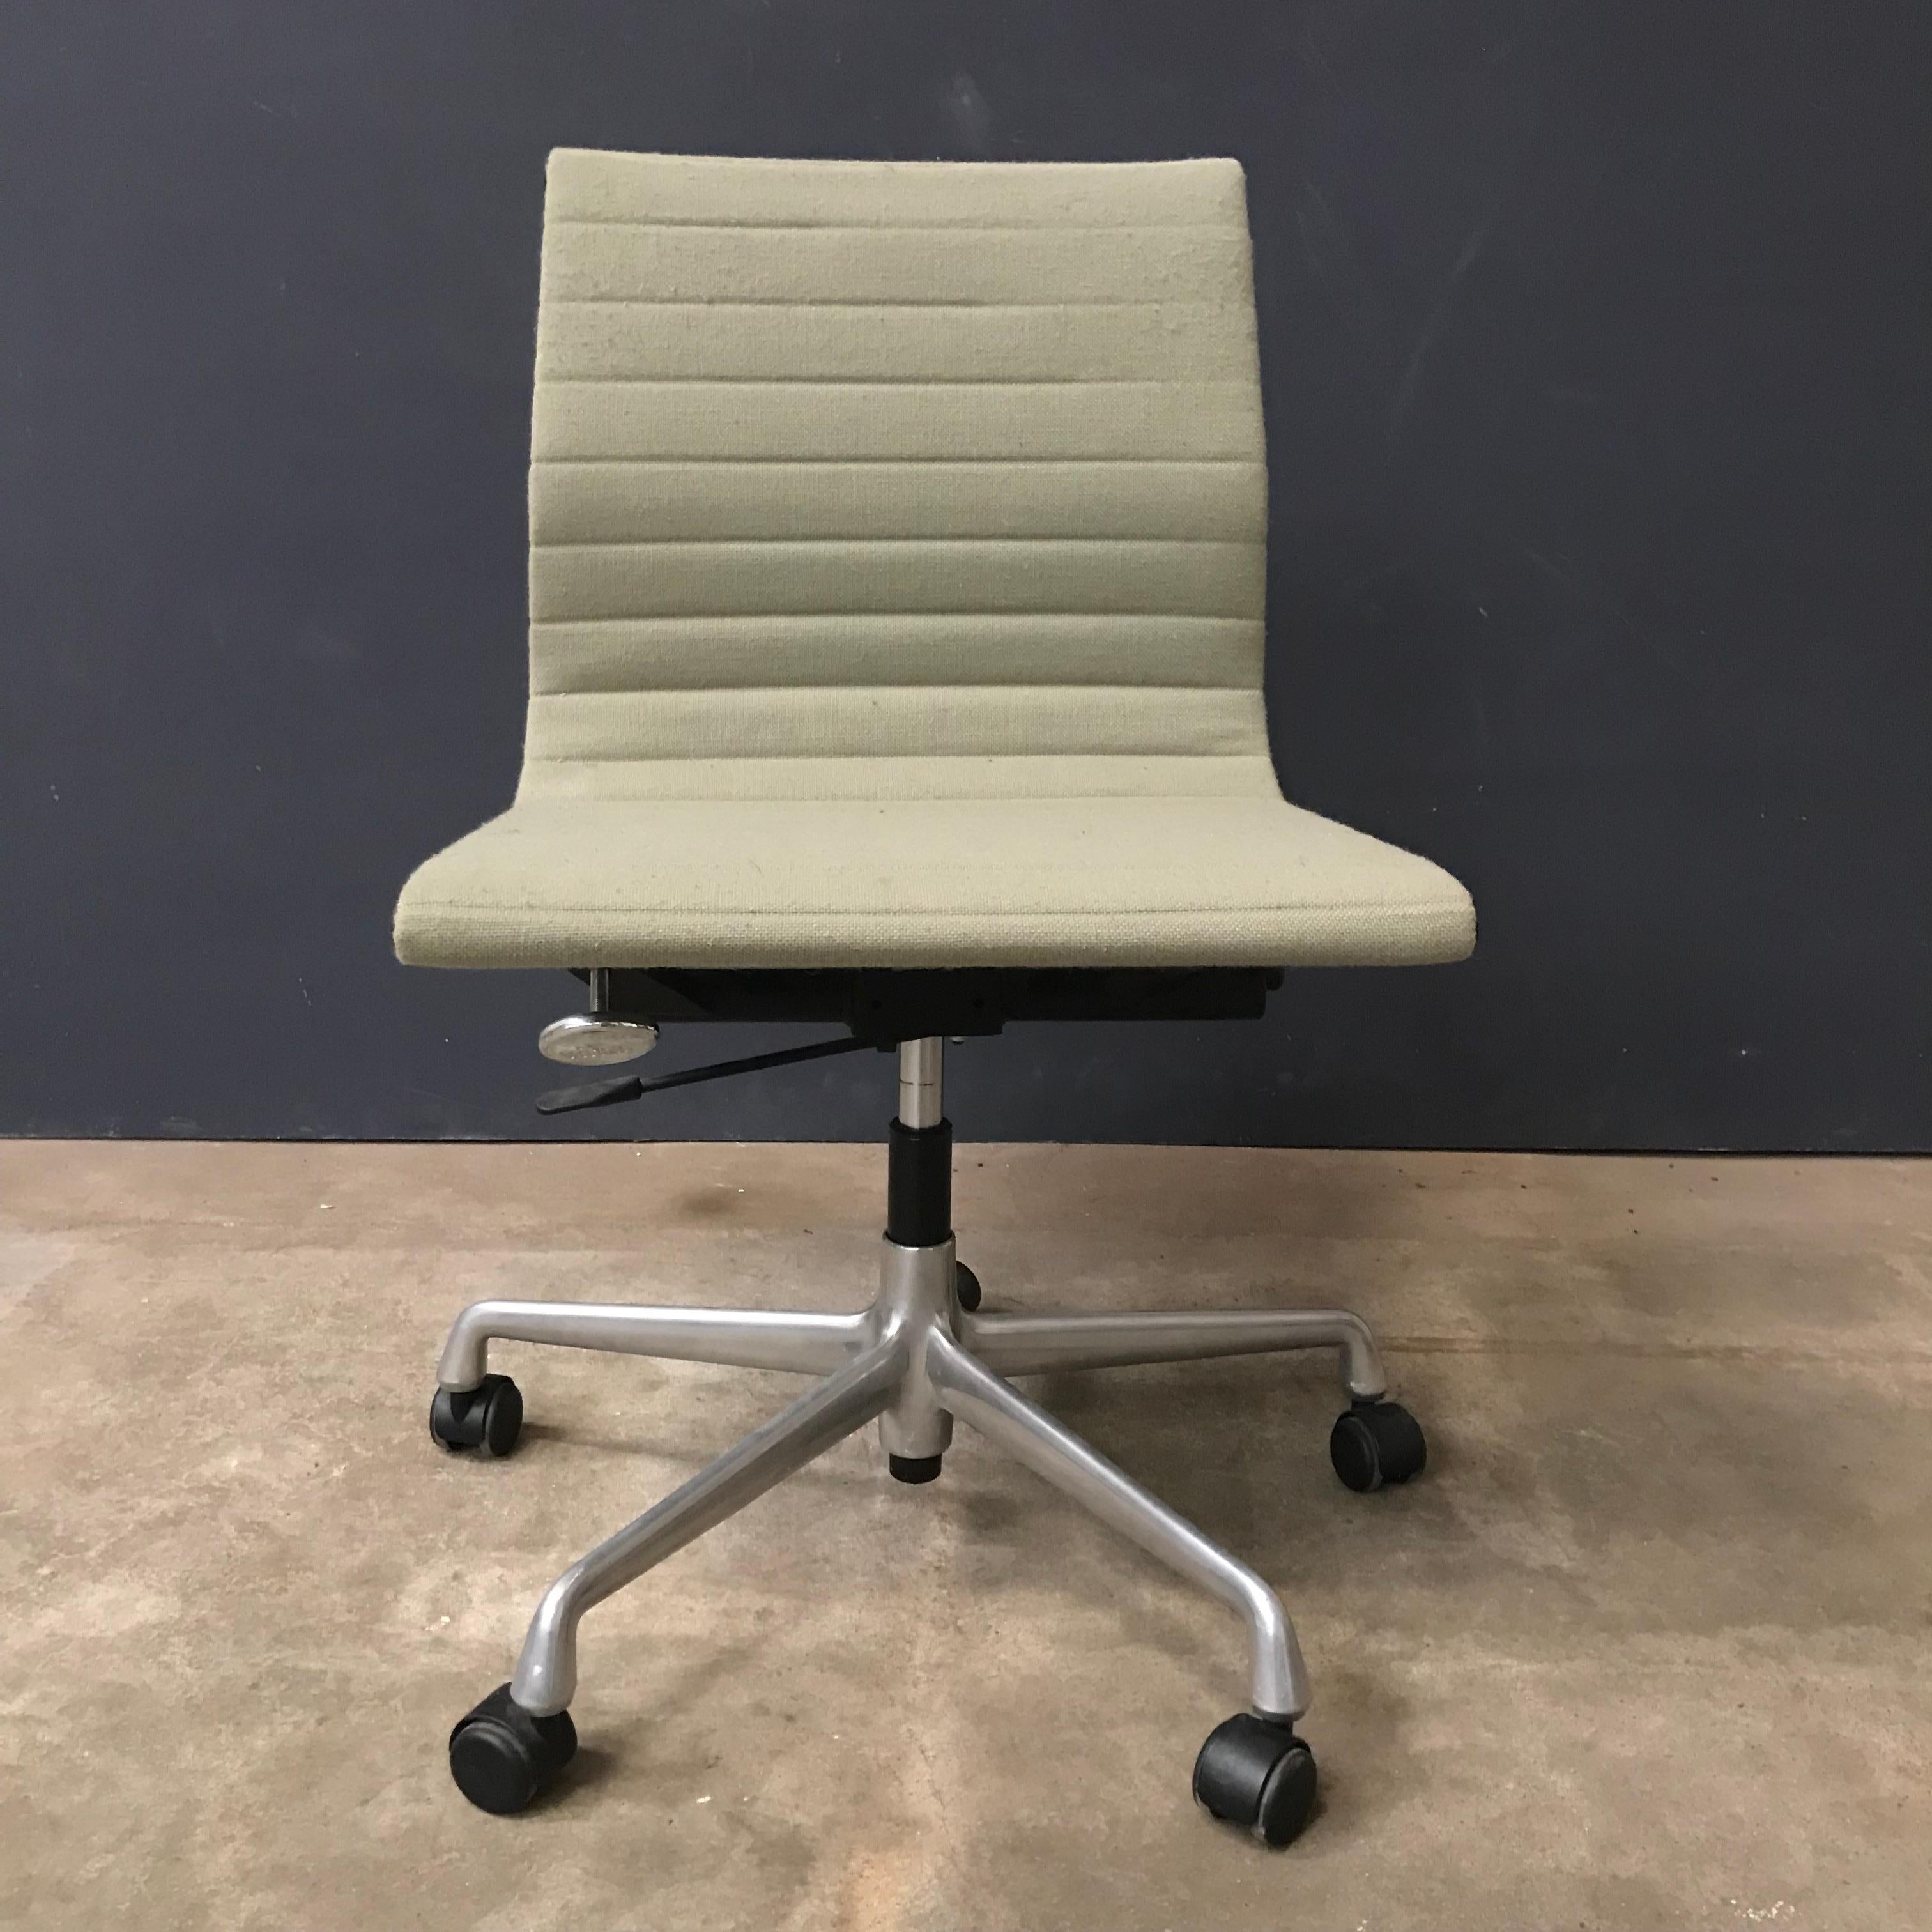 Mid-Century Modern 1958 Ray and Charles Eames, Fabric, Adjust, Tilt, Office Chair 4 Wheels No Arms For Sale